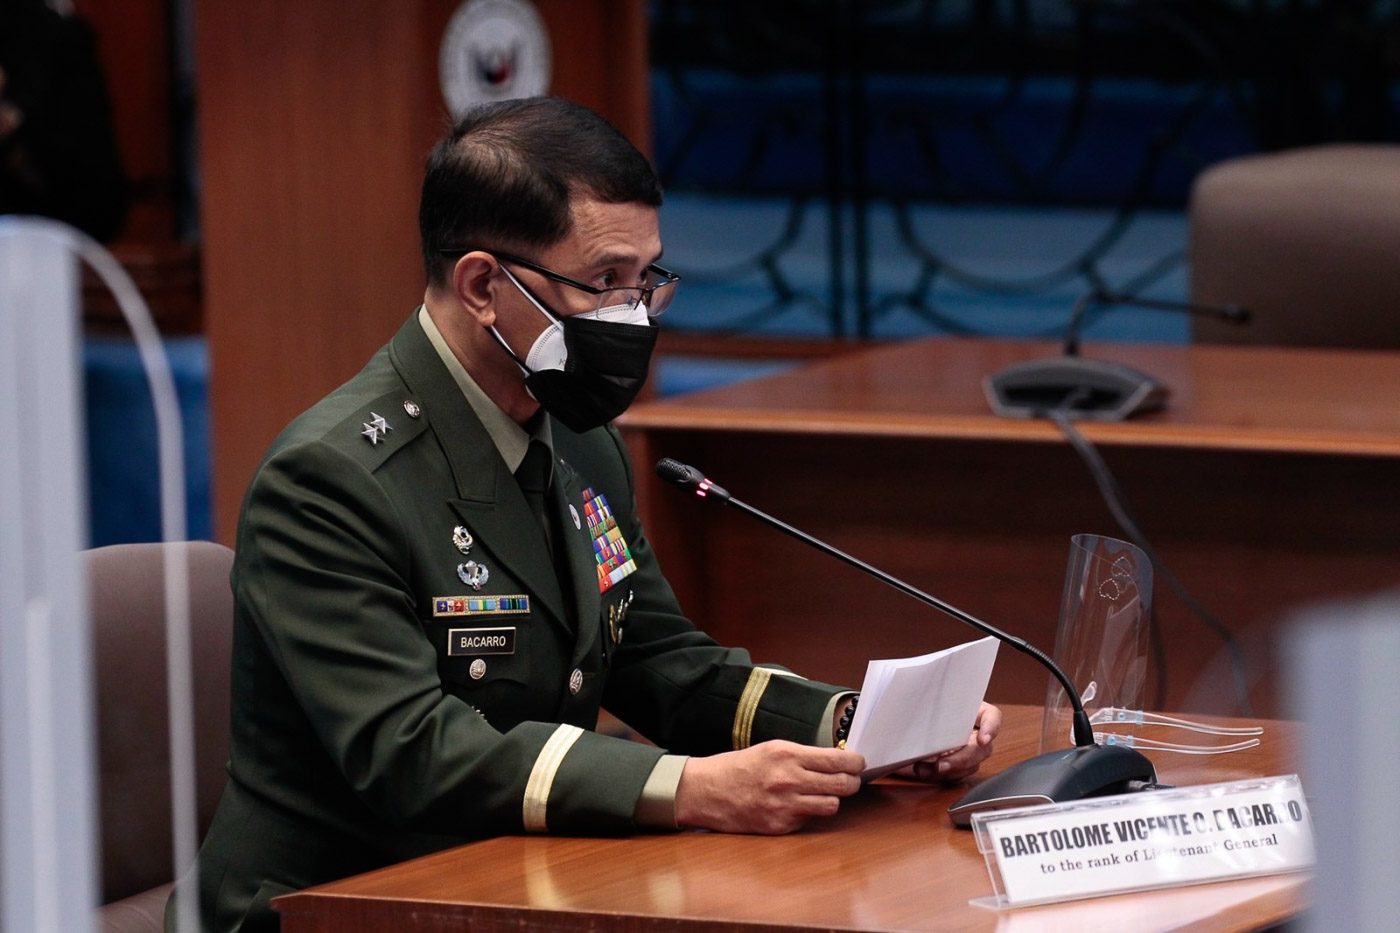 CA defers confirmation of Solcom chief Bacarro due to PMA hazing issue